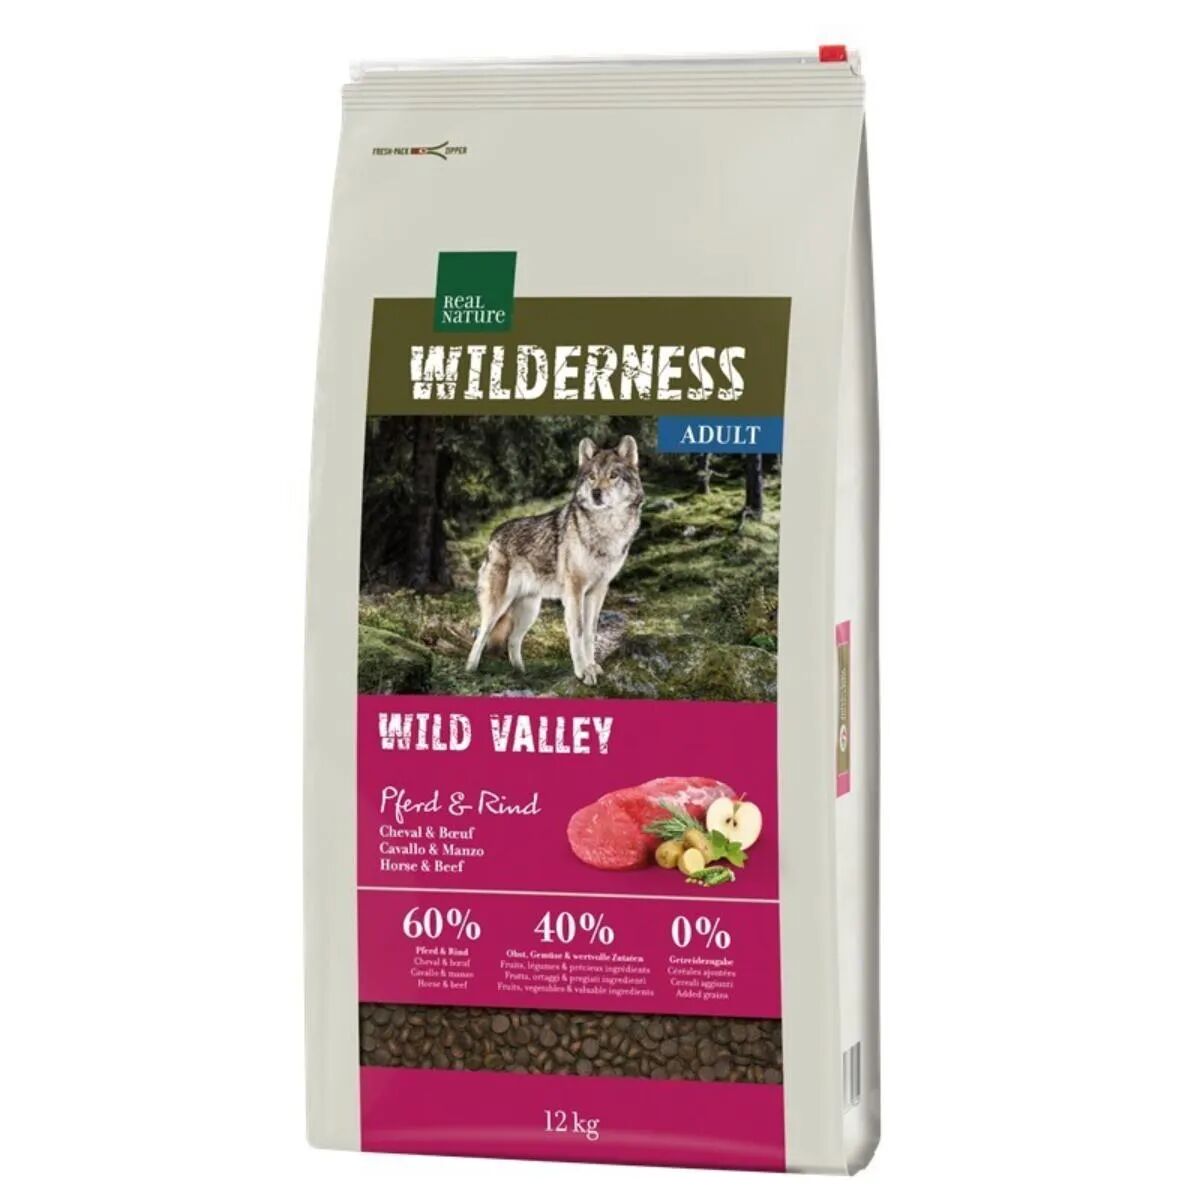 REAL NATURE Wilderness Cane Adult Wild Valley 12KG